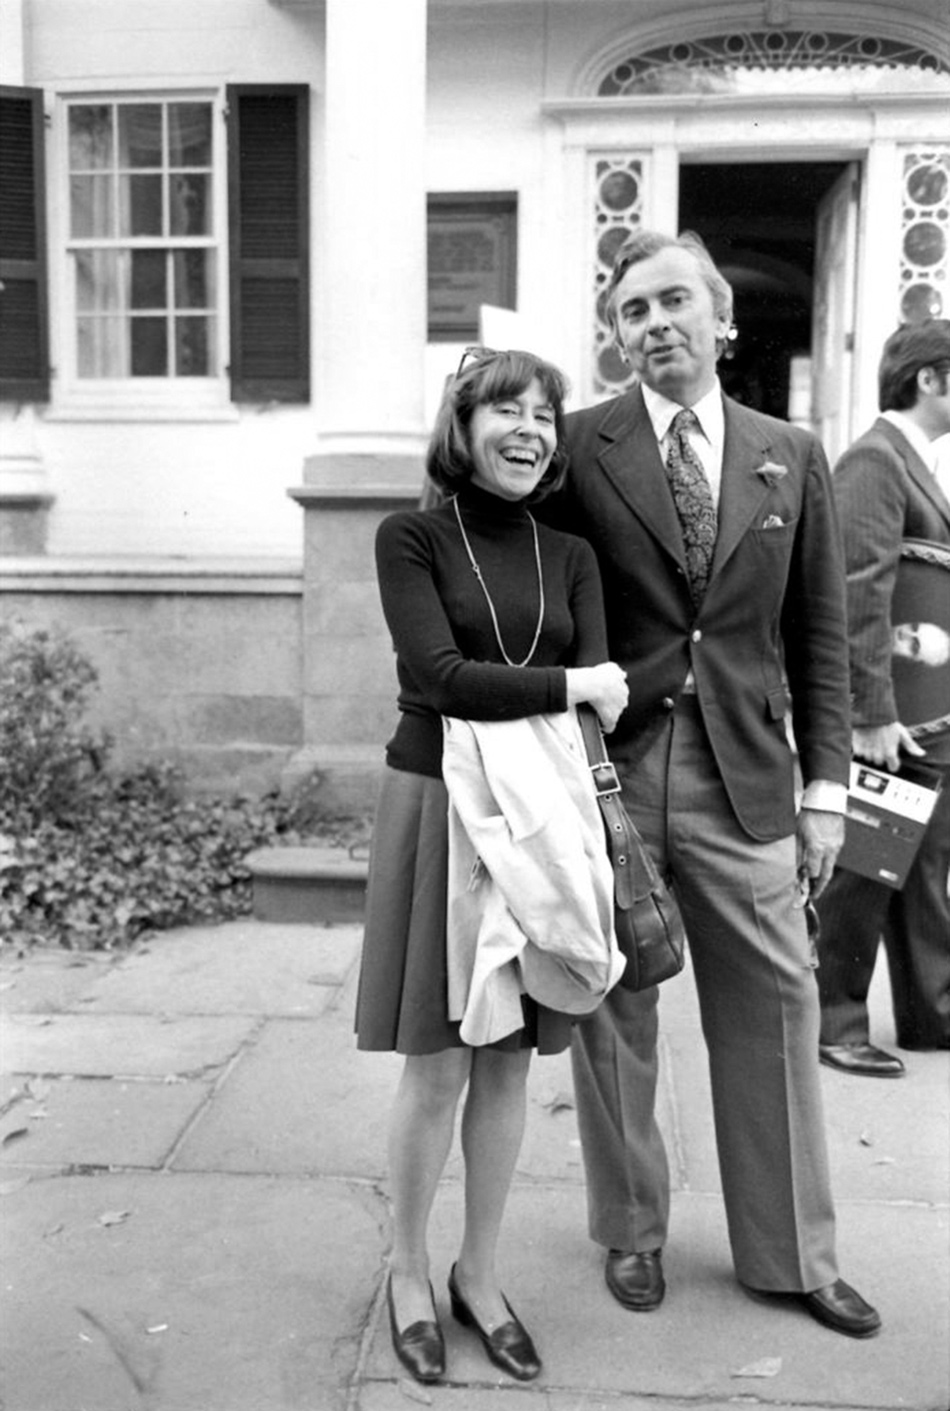 Gore Vidal with The New York Review’s founding co-editor Barbara Epstein, 1974